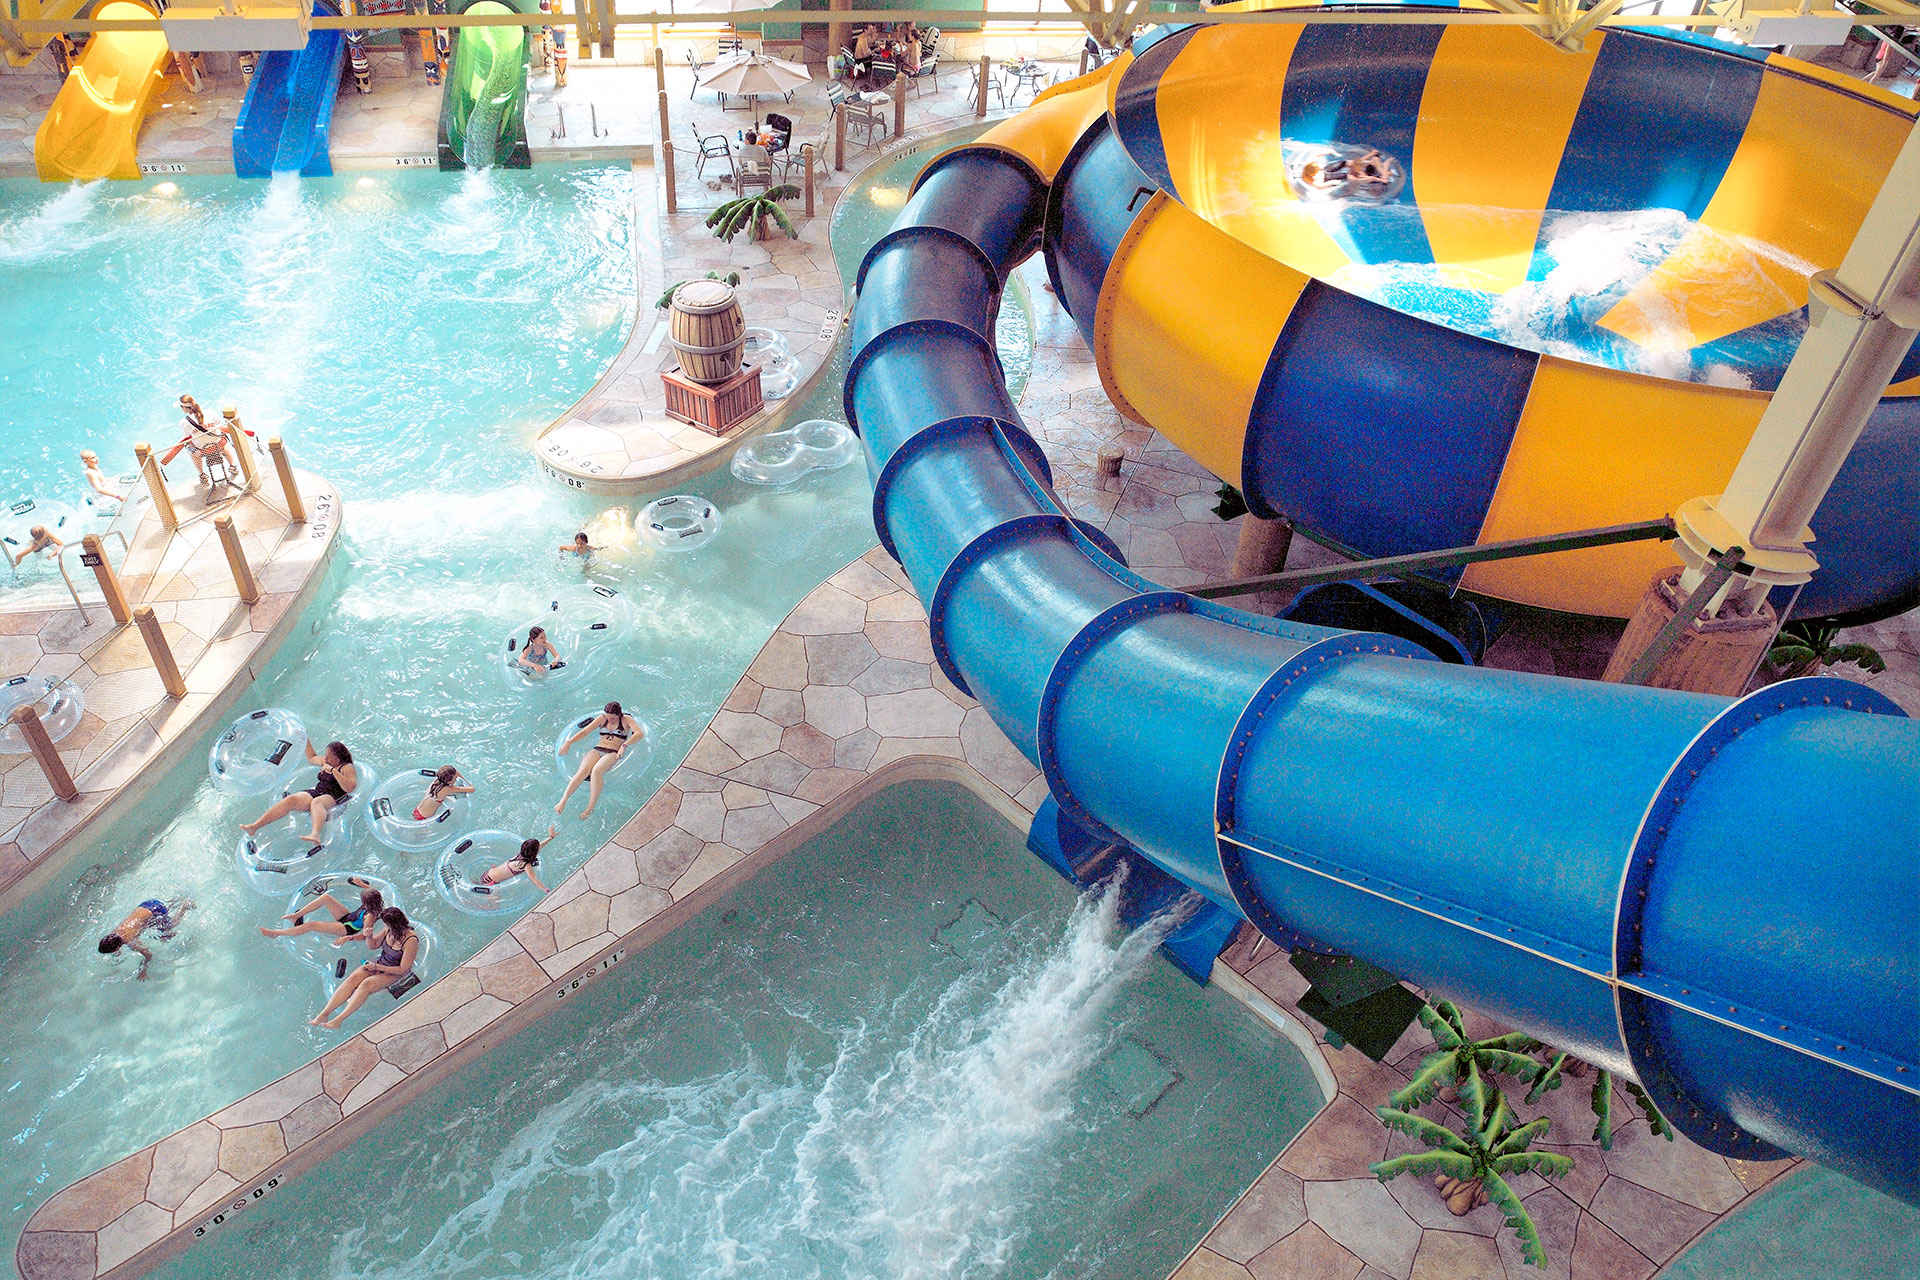 pool slide at Great Wolf Lodge; Courtesy of Great Wolf Lodge